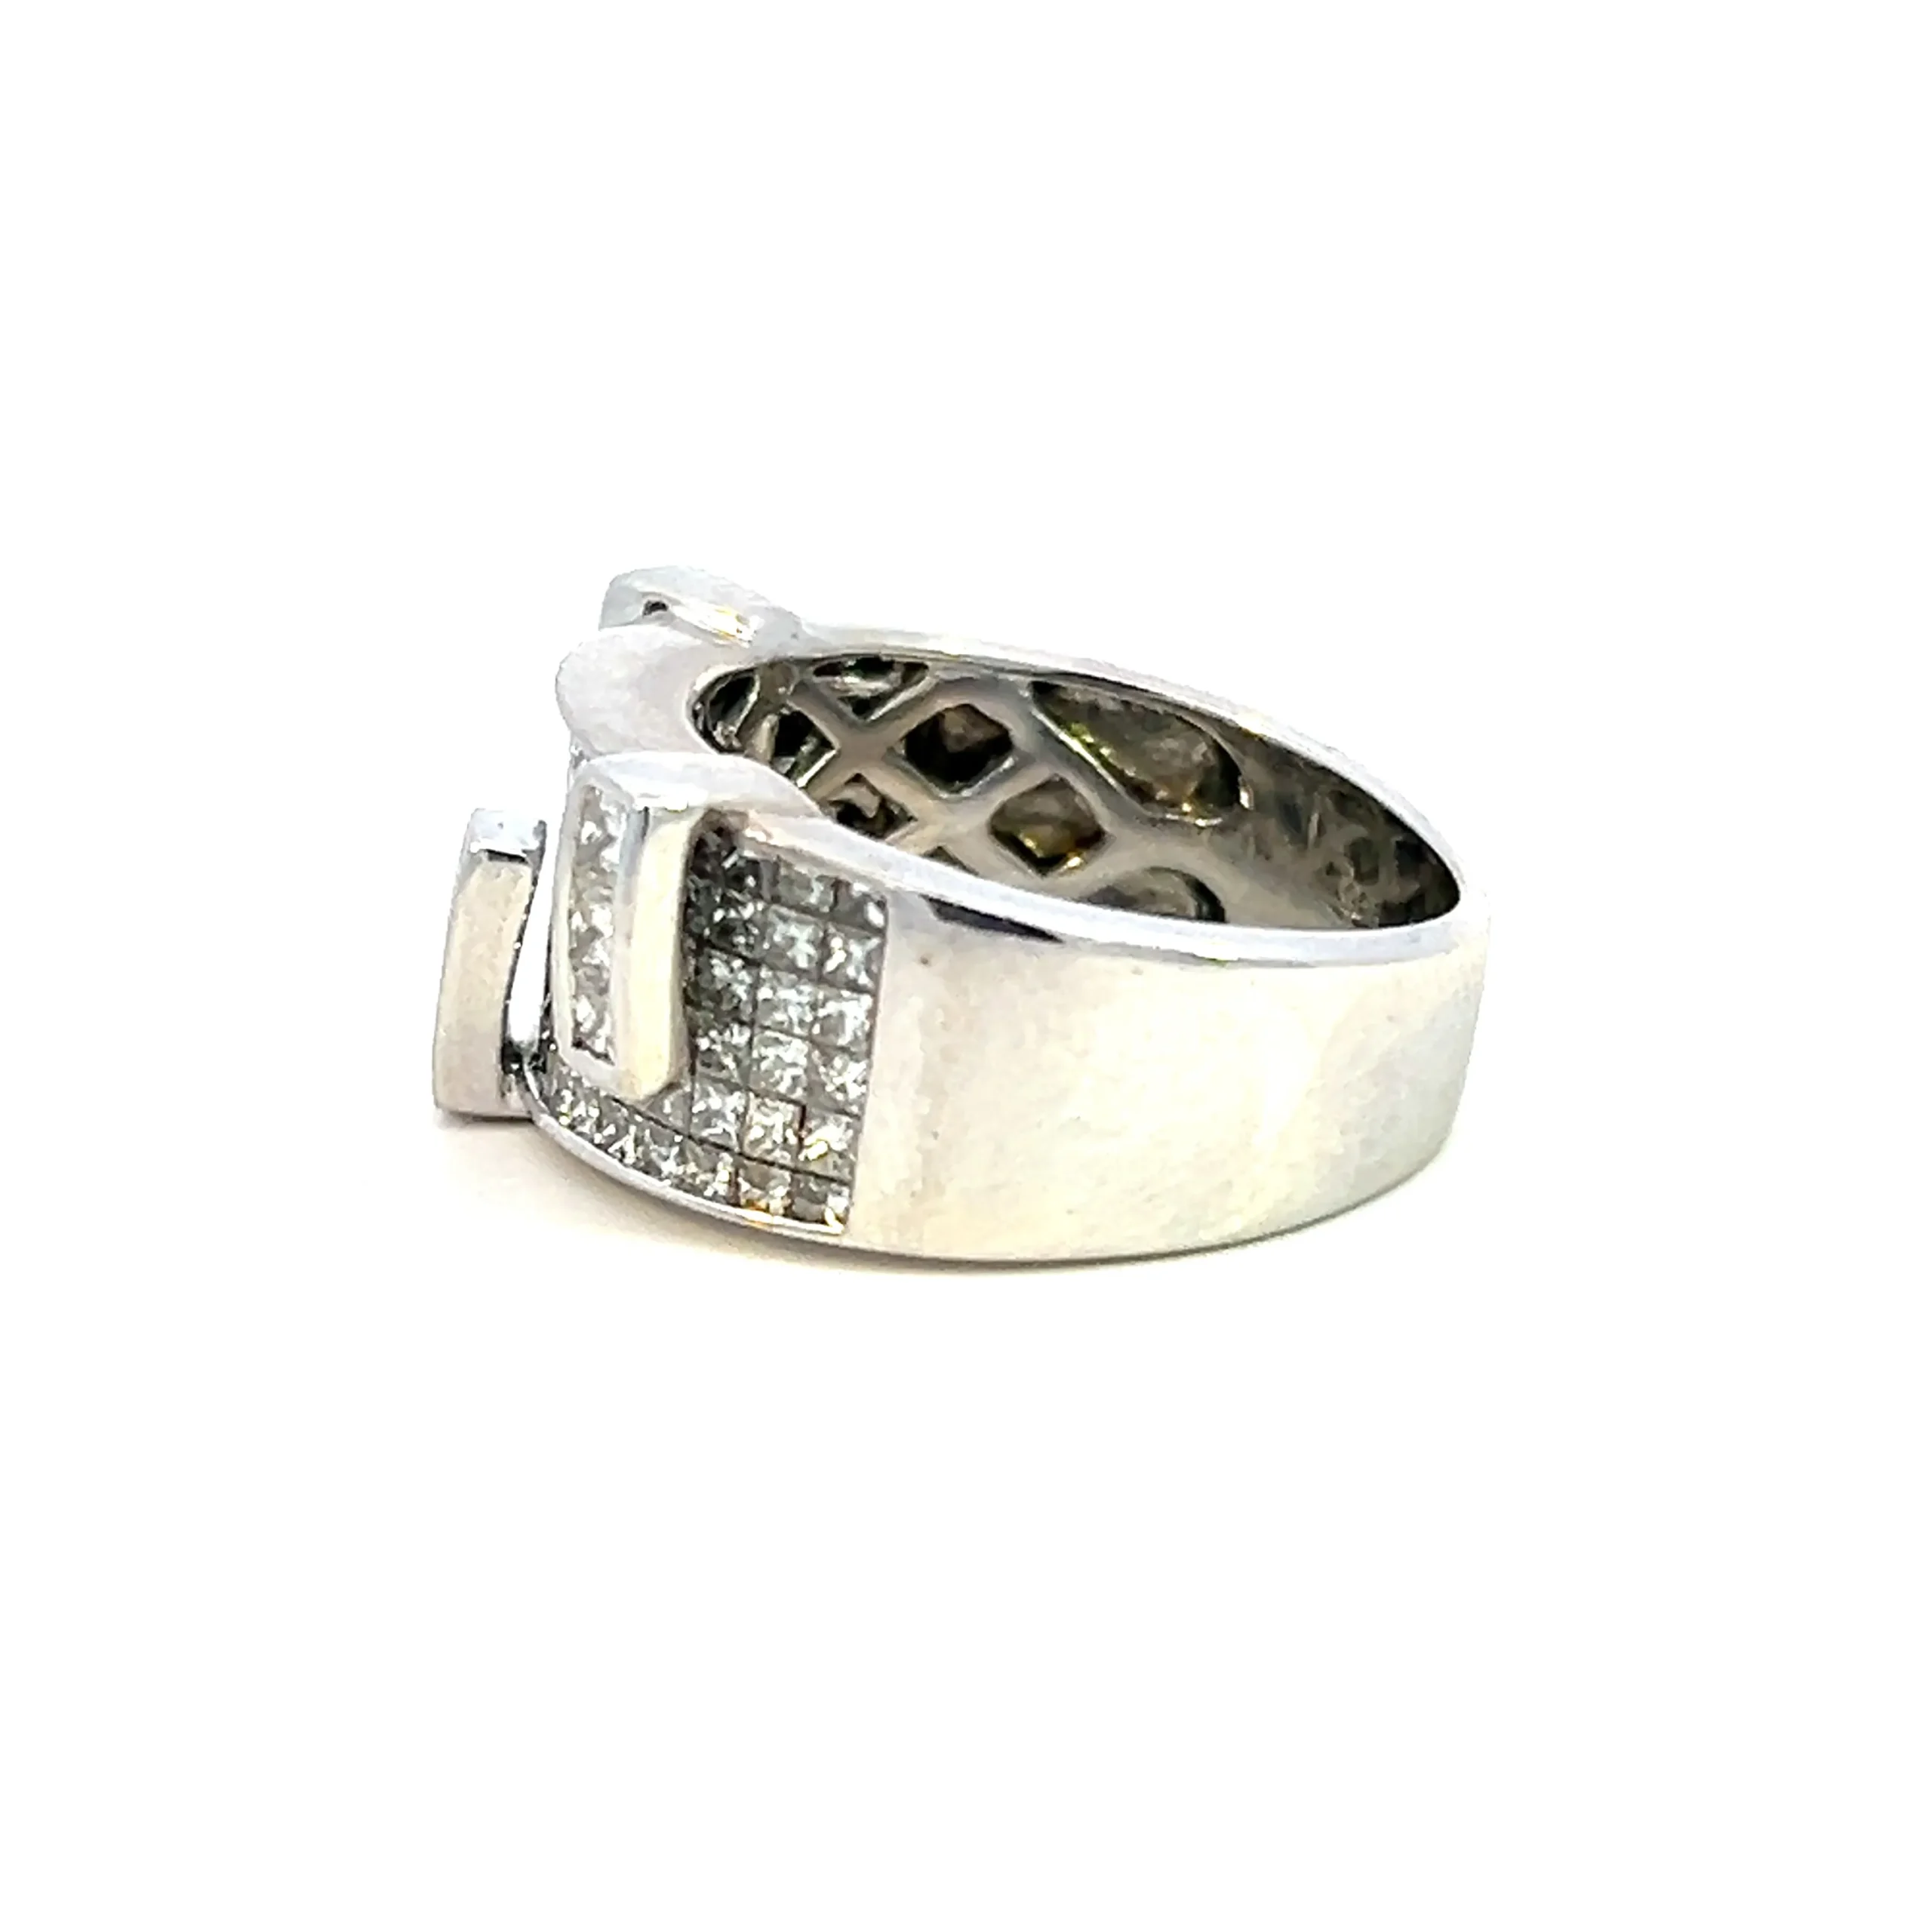 One estate 14 karat white gold men's diamond band containing 106 princess-cut diamonds in invisible settings with three rectangle sections protruding from the design each with 3 invisible-set princess-cut diamonds